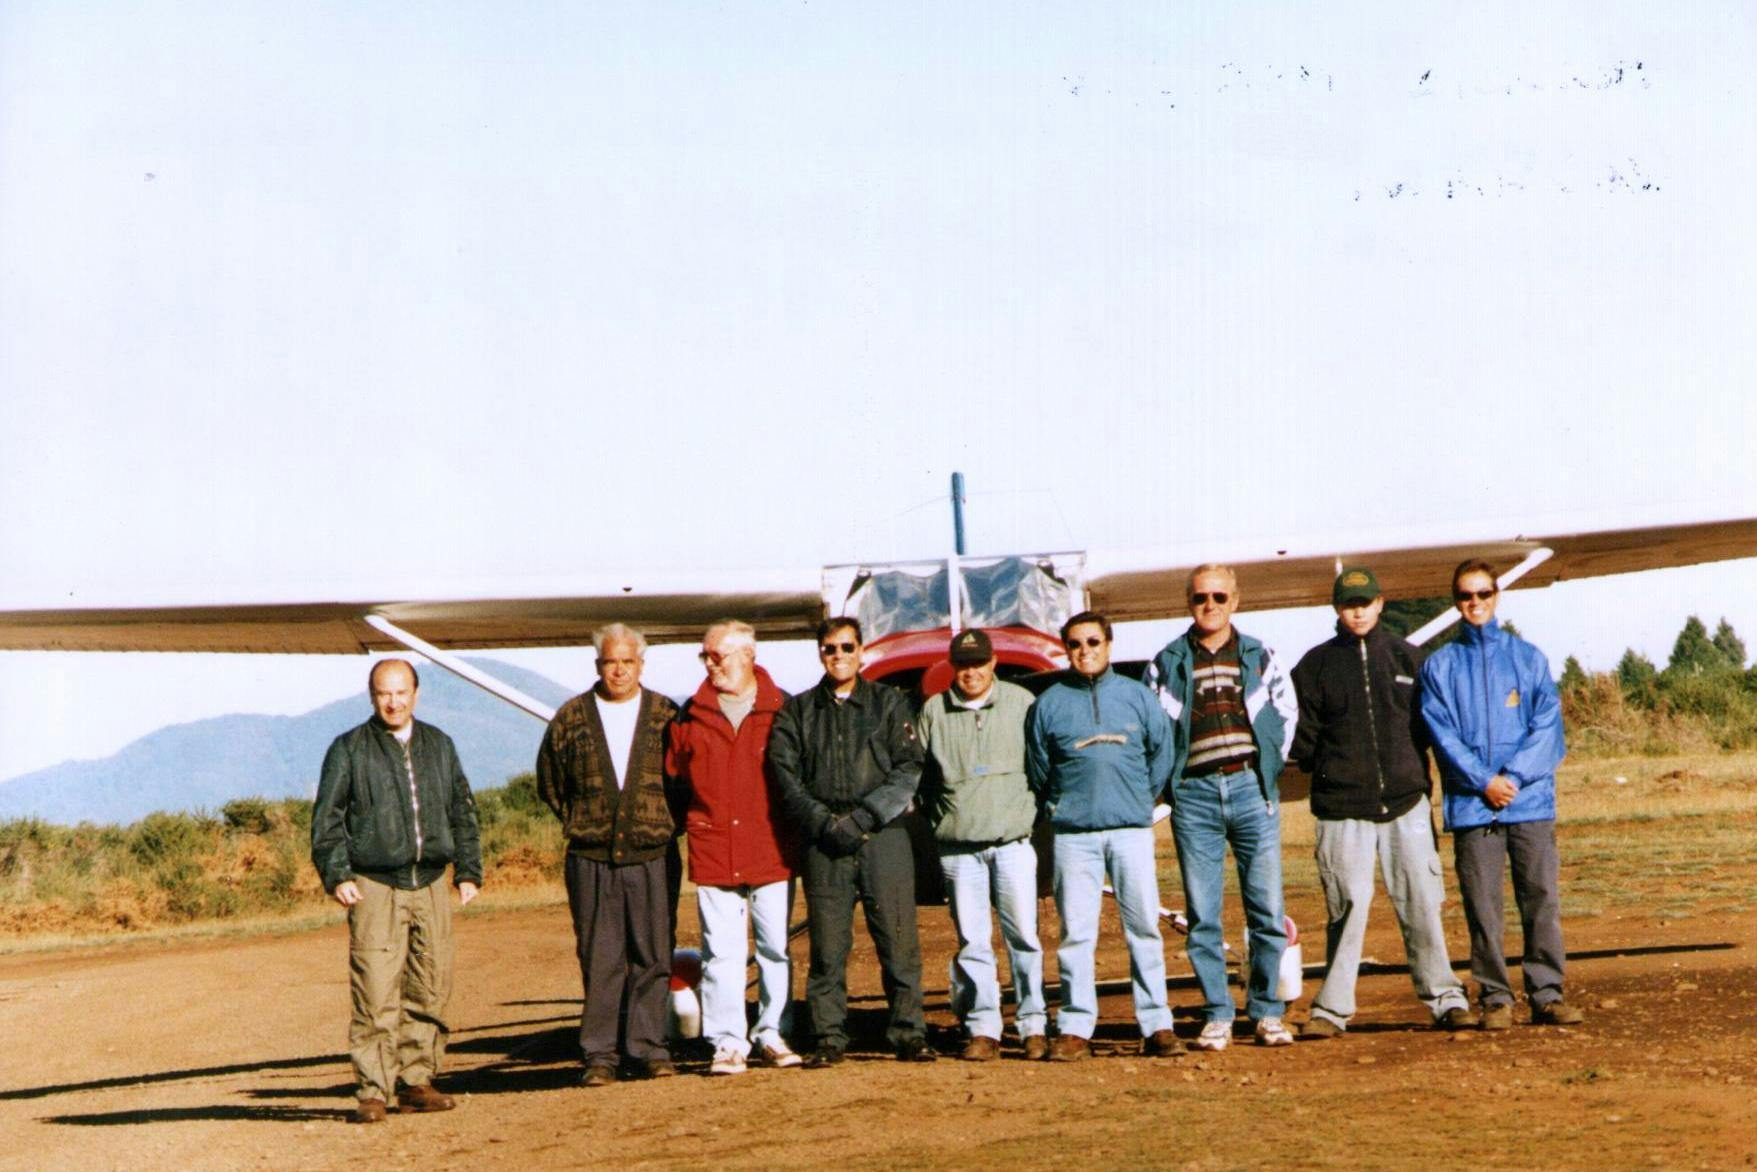 Chile, early 21st century. Airport staff. Among the Chileans, third from the left is Zbigniew Kowalski.